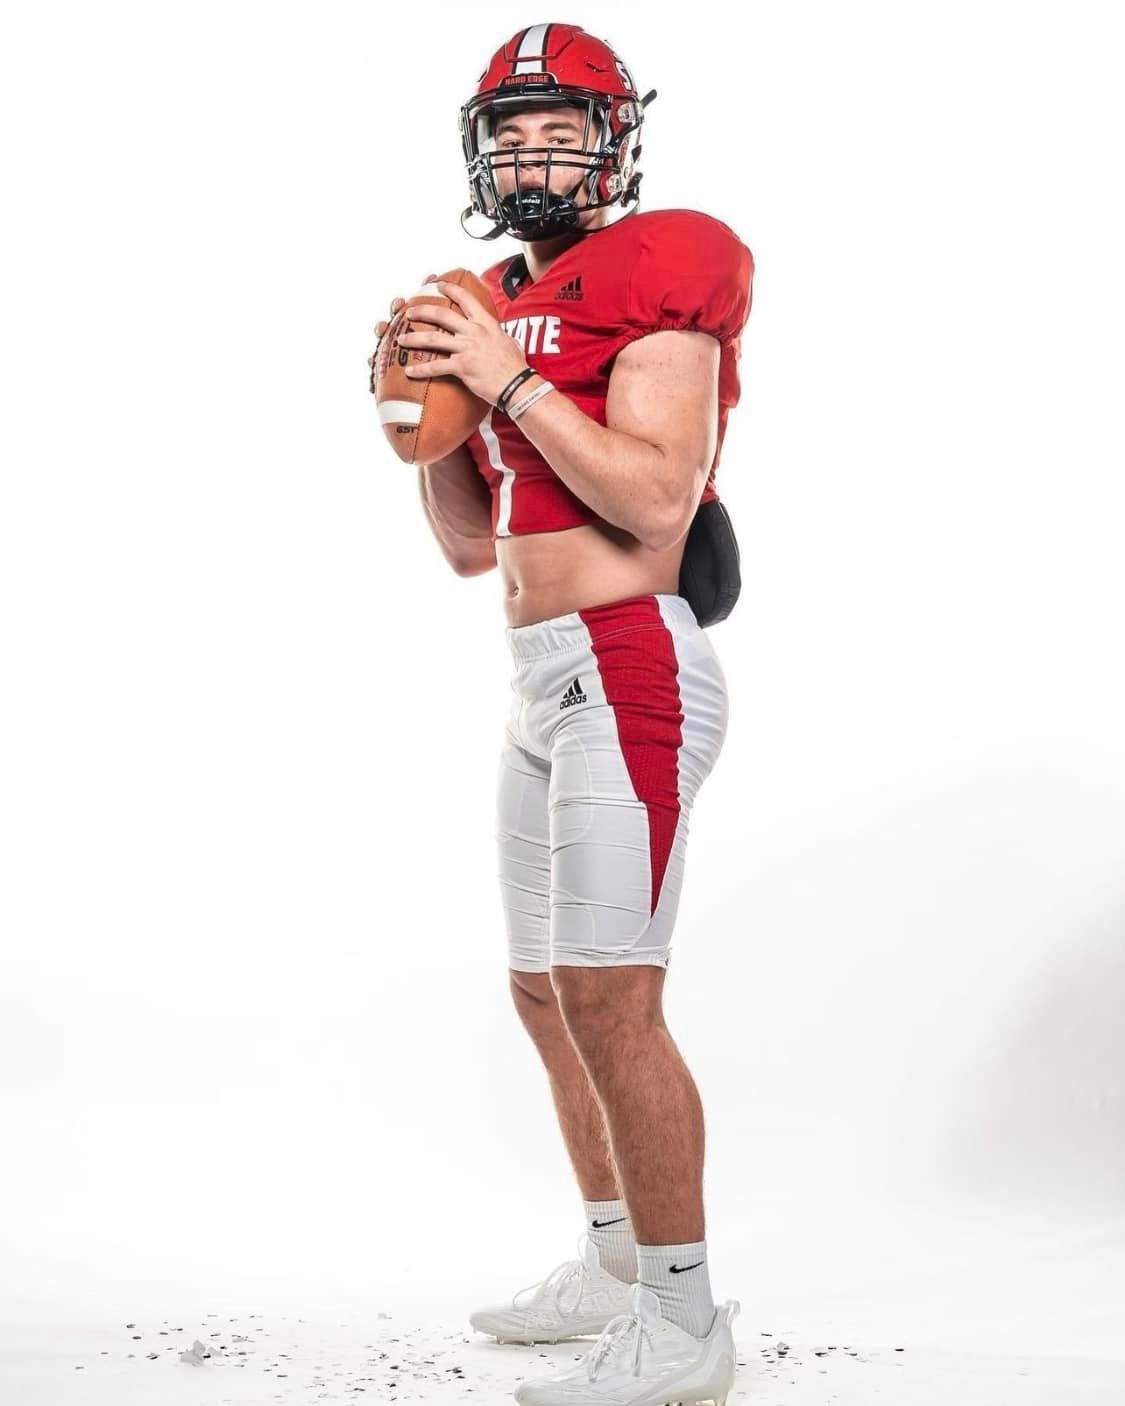 Fairhope's Caden Creel announced his commitment to the Jacksonville State Gamecocks Thursday morning, Dec. 8, after his time with the Pirates. The dual-threat quarterback is listed at 6' and 200 pounds.